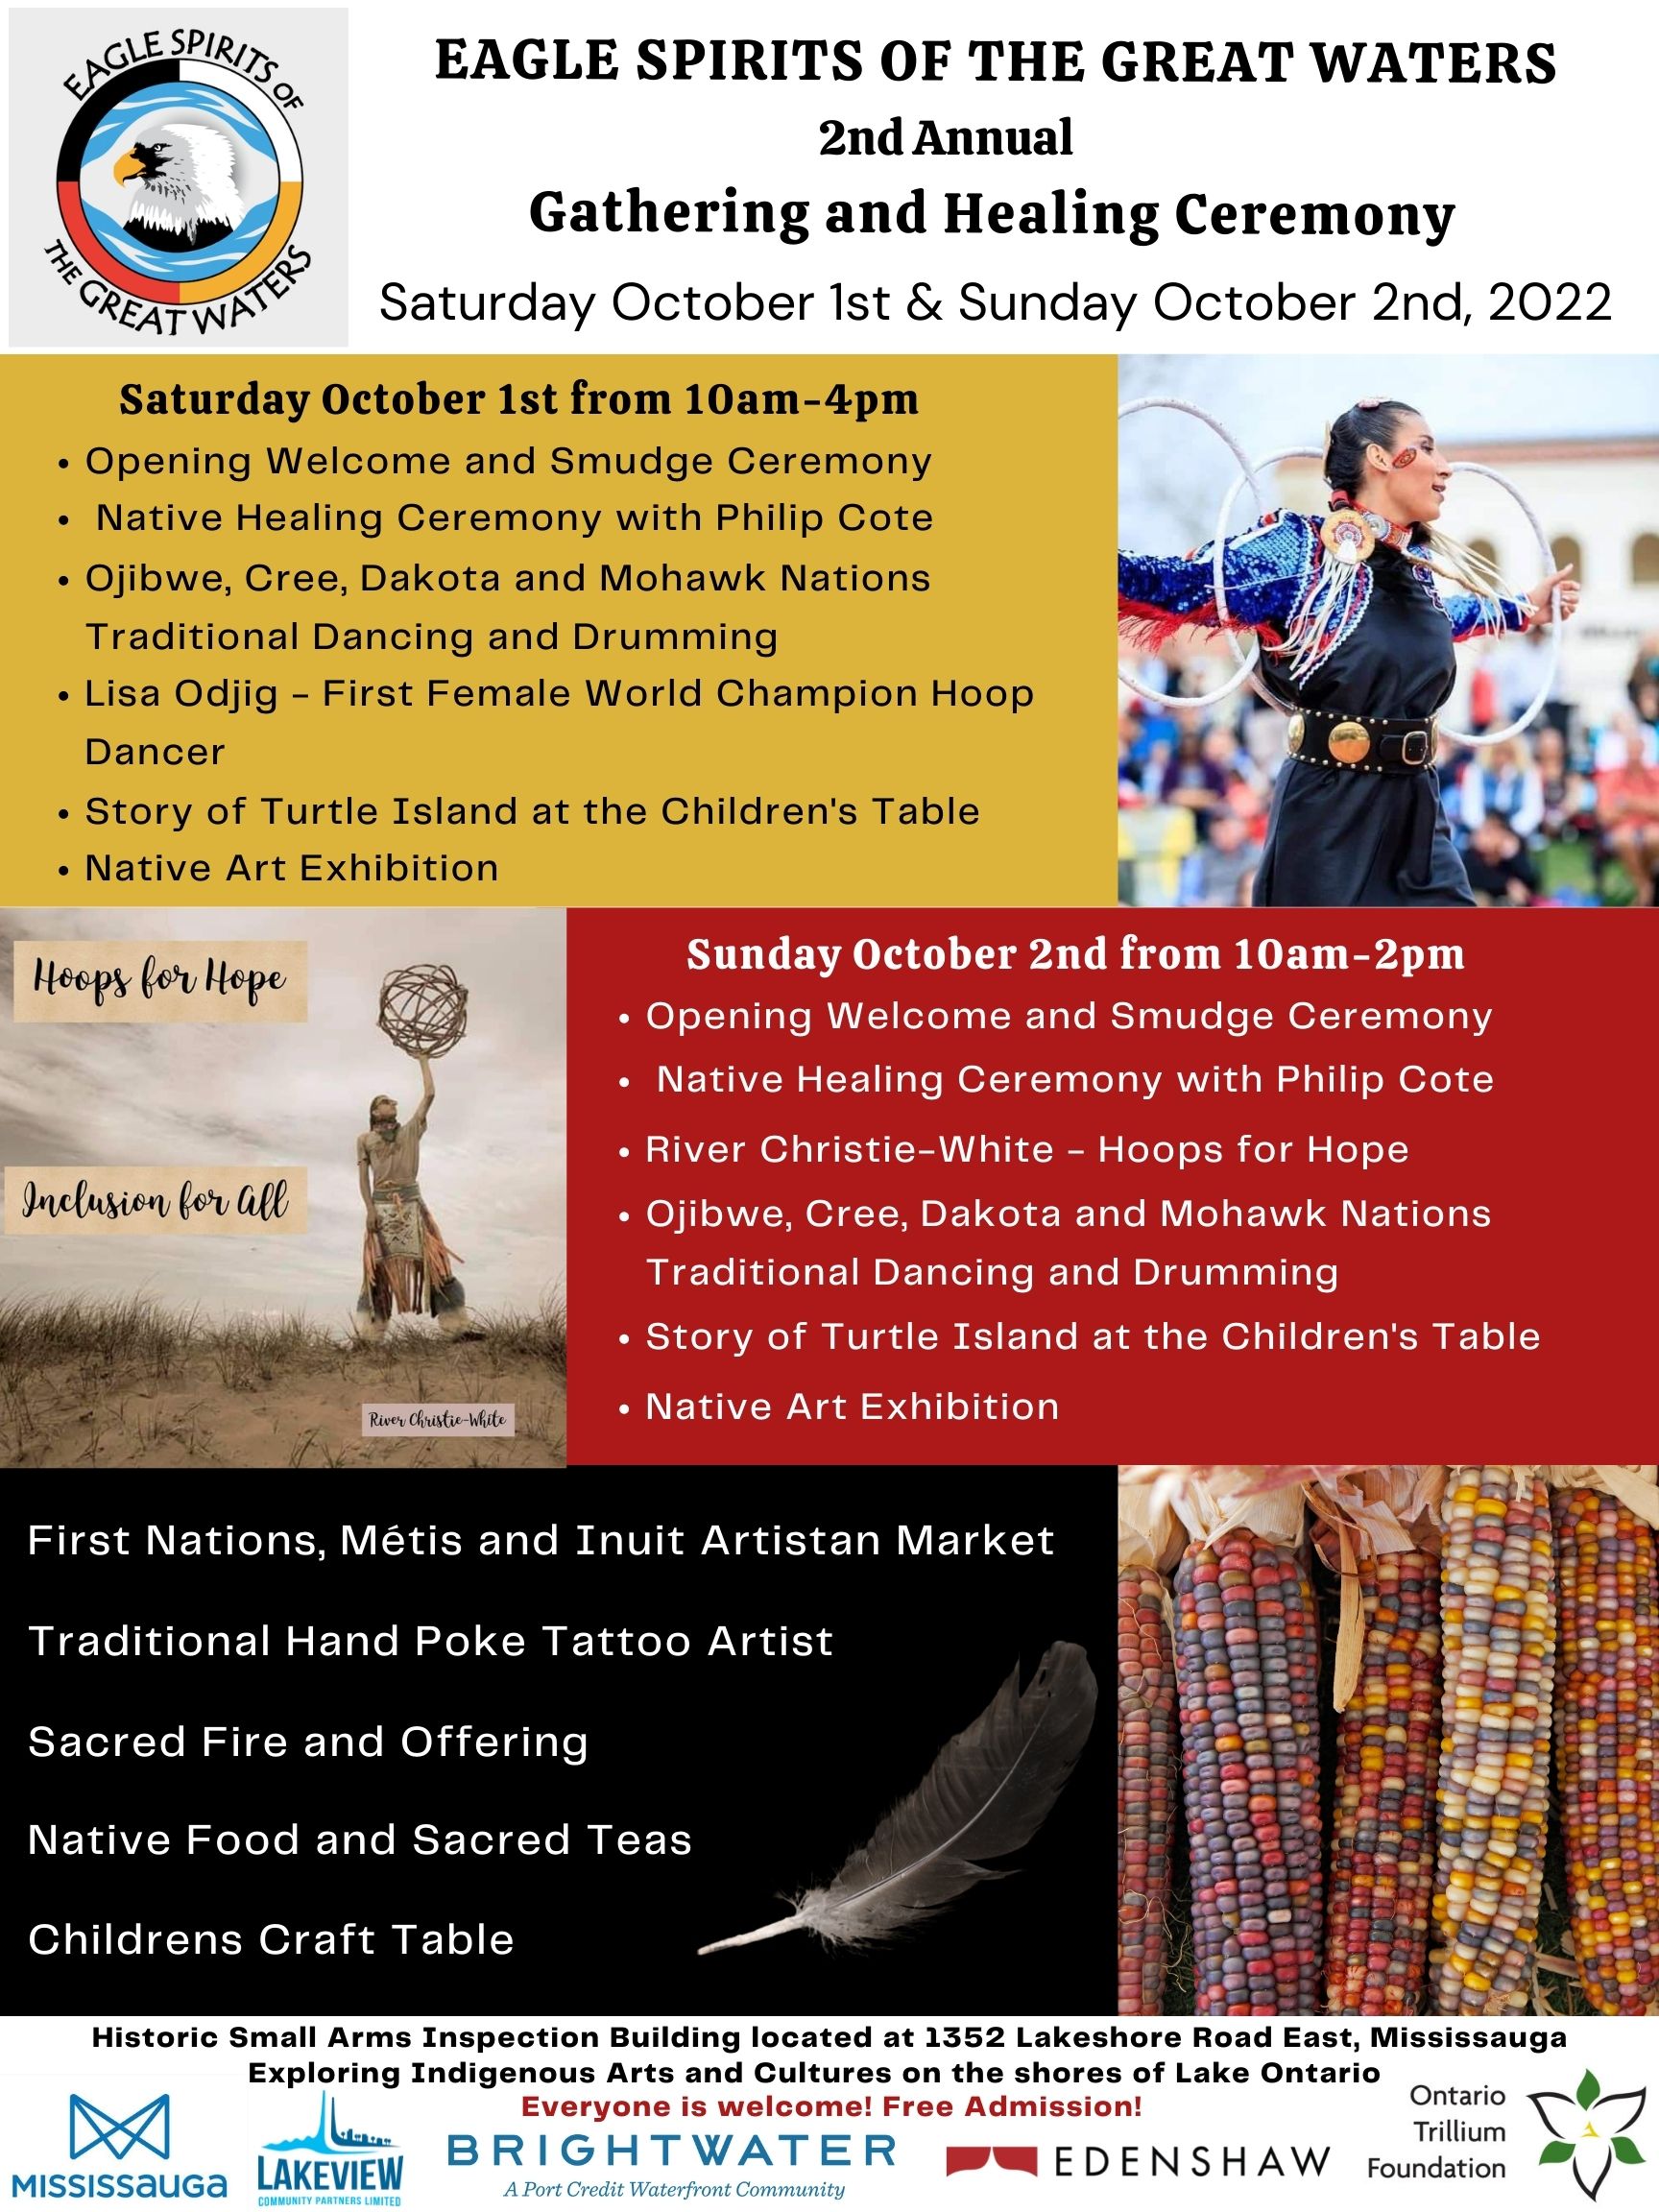 Eagle Spirits of the Great Waters: 2nd Annual Gathering and Healing Ceremony